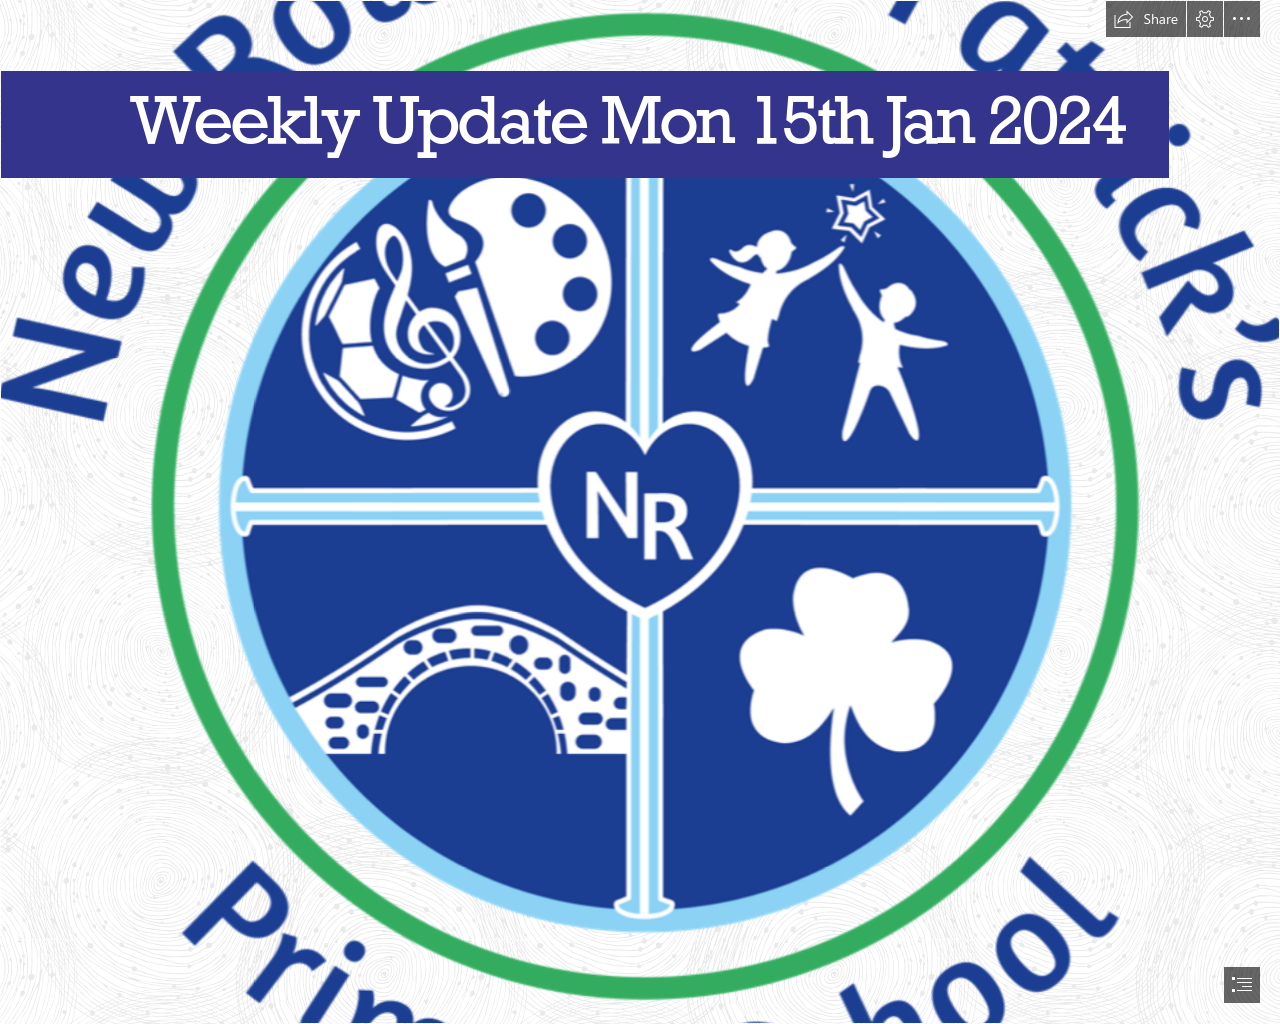 Weekly Update Monday 18th January 2024